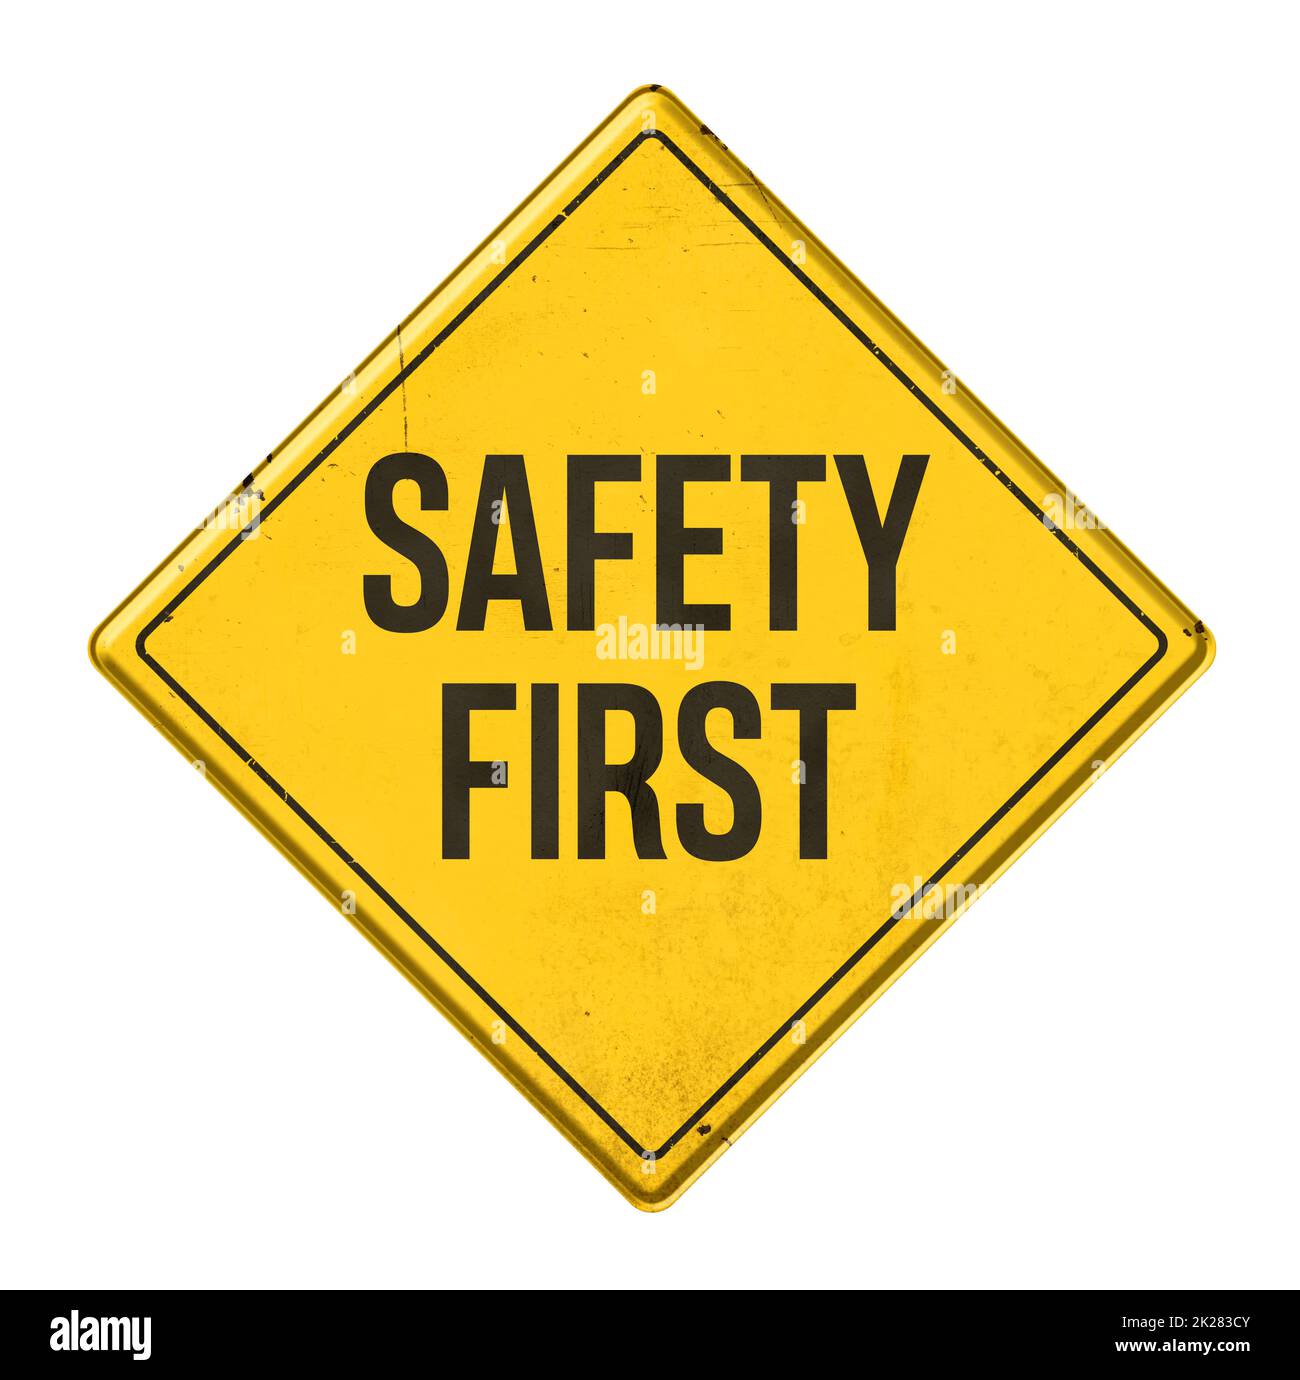 Yellow sign on a white background - Safety first Stock Photo